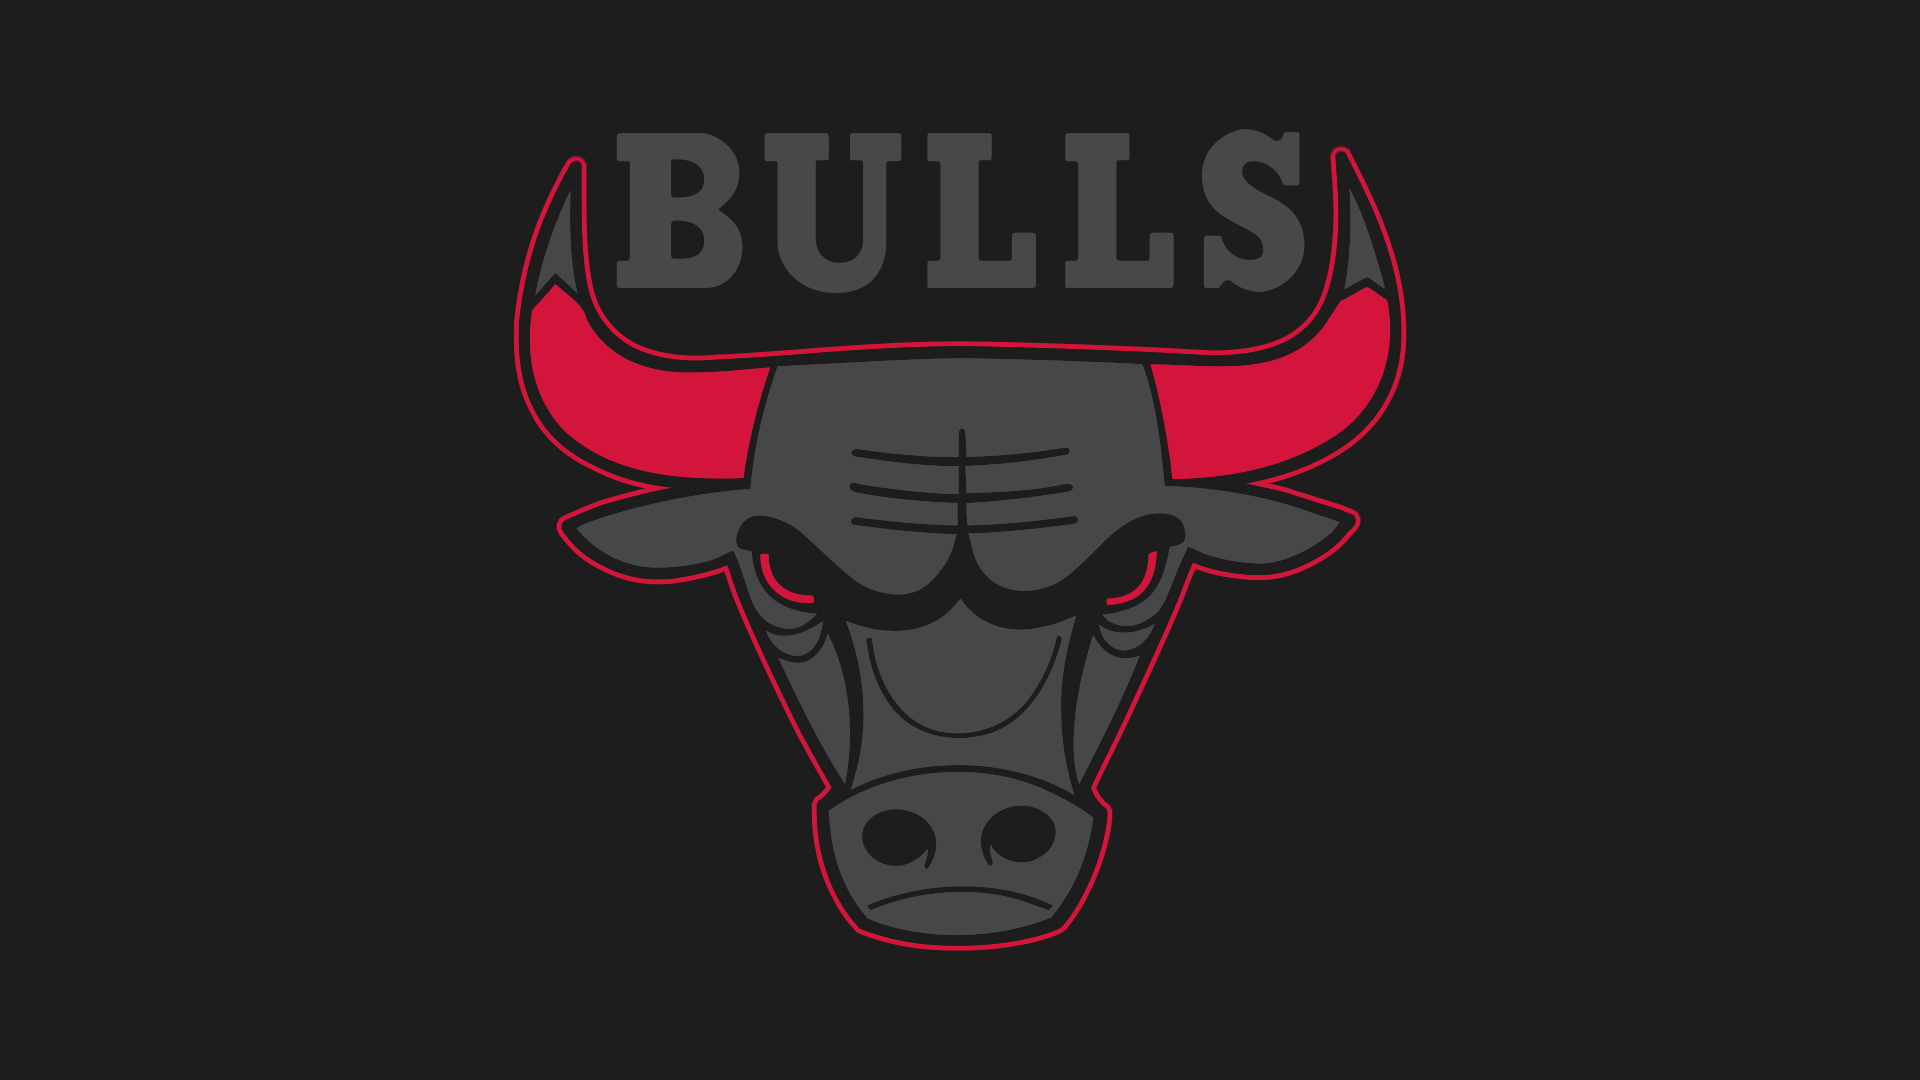 Chicago Bulls Logo Wallpapers HD 16 ios Backgrounds wfz, this wallpaper you can use as the background/wallpaper of computer dekstop, laptop, tablet or other ...